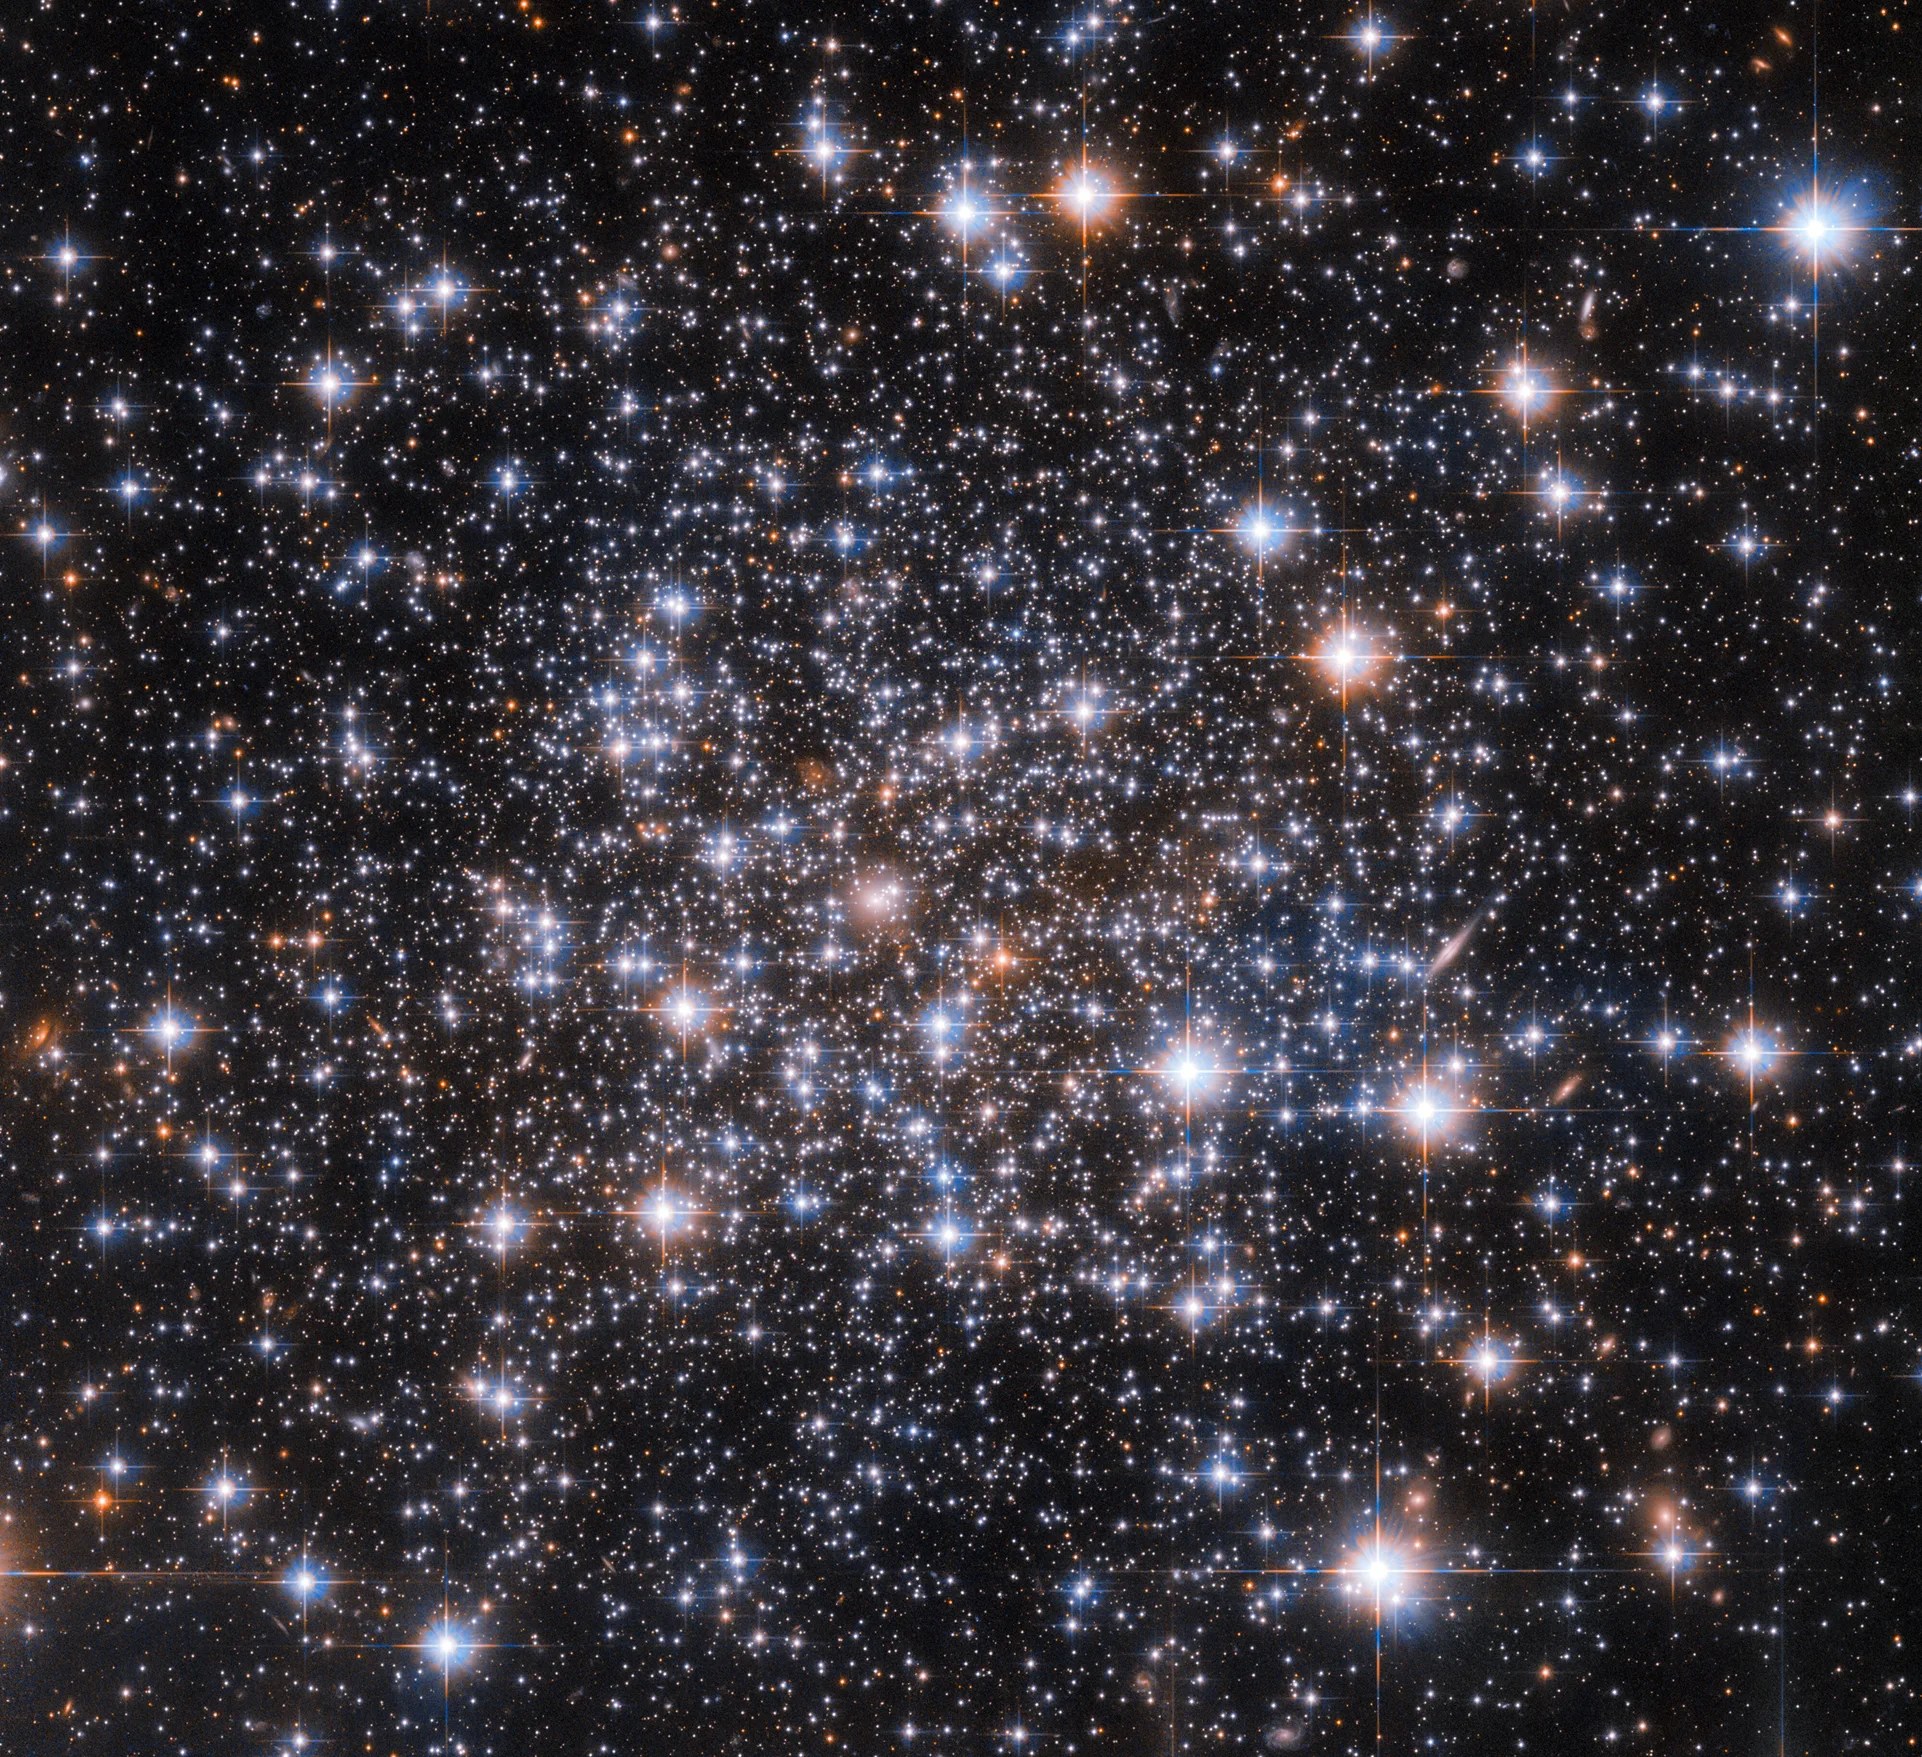 Bright, rounded cluster of white stars, some with blue or red halos.